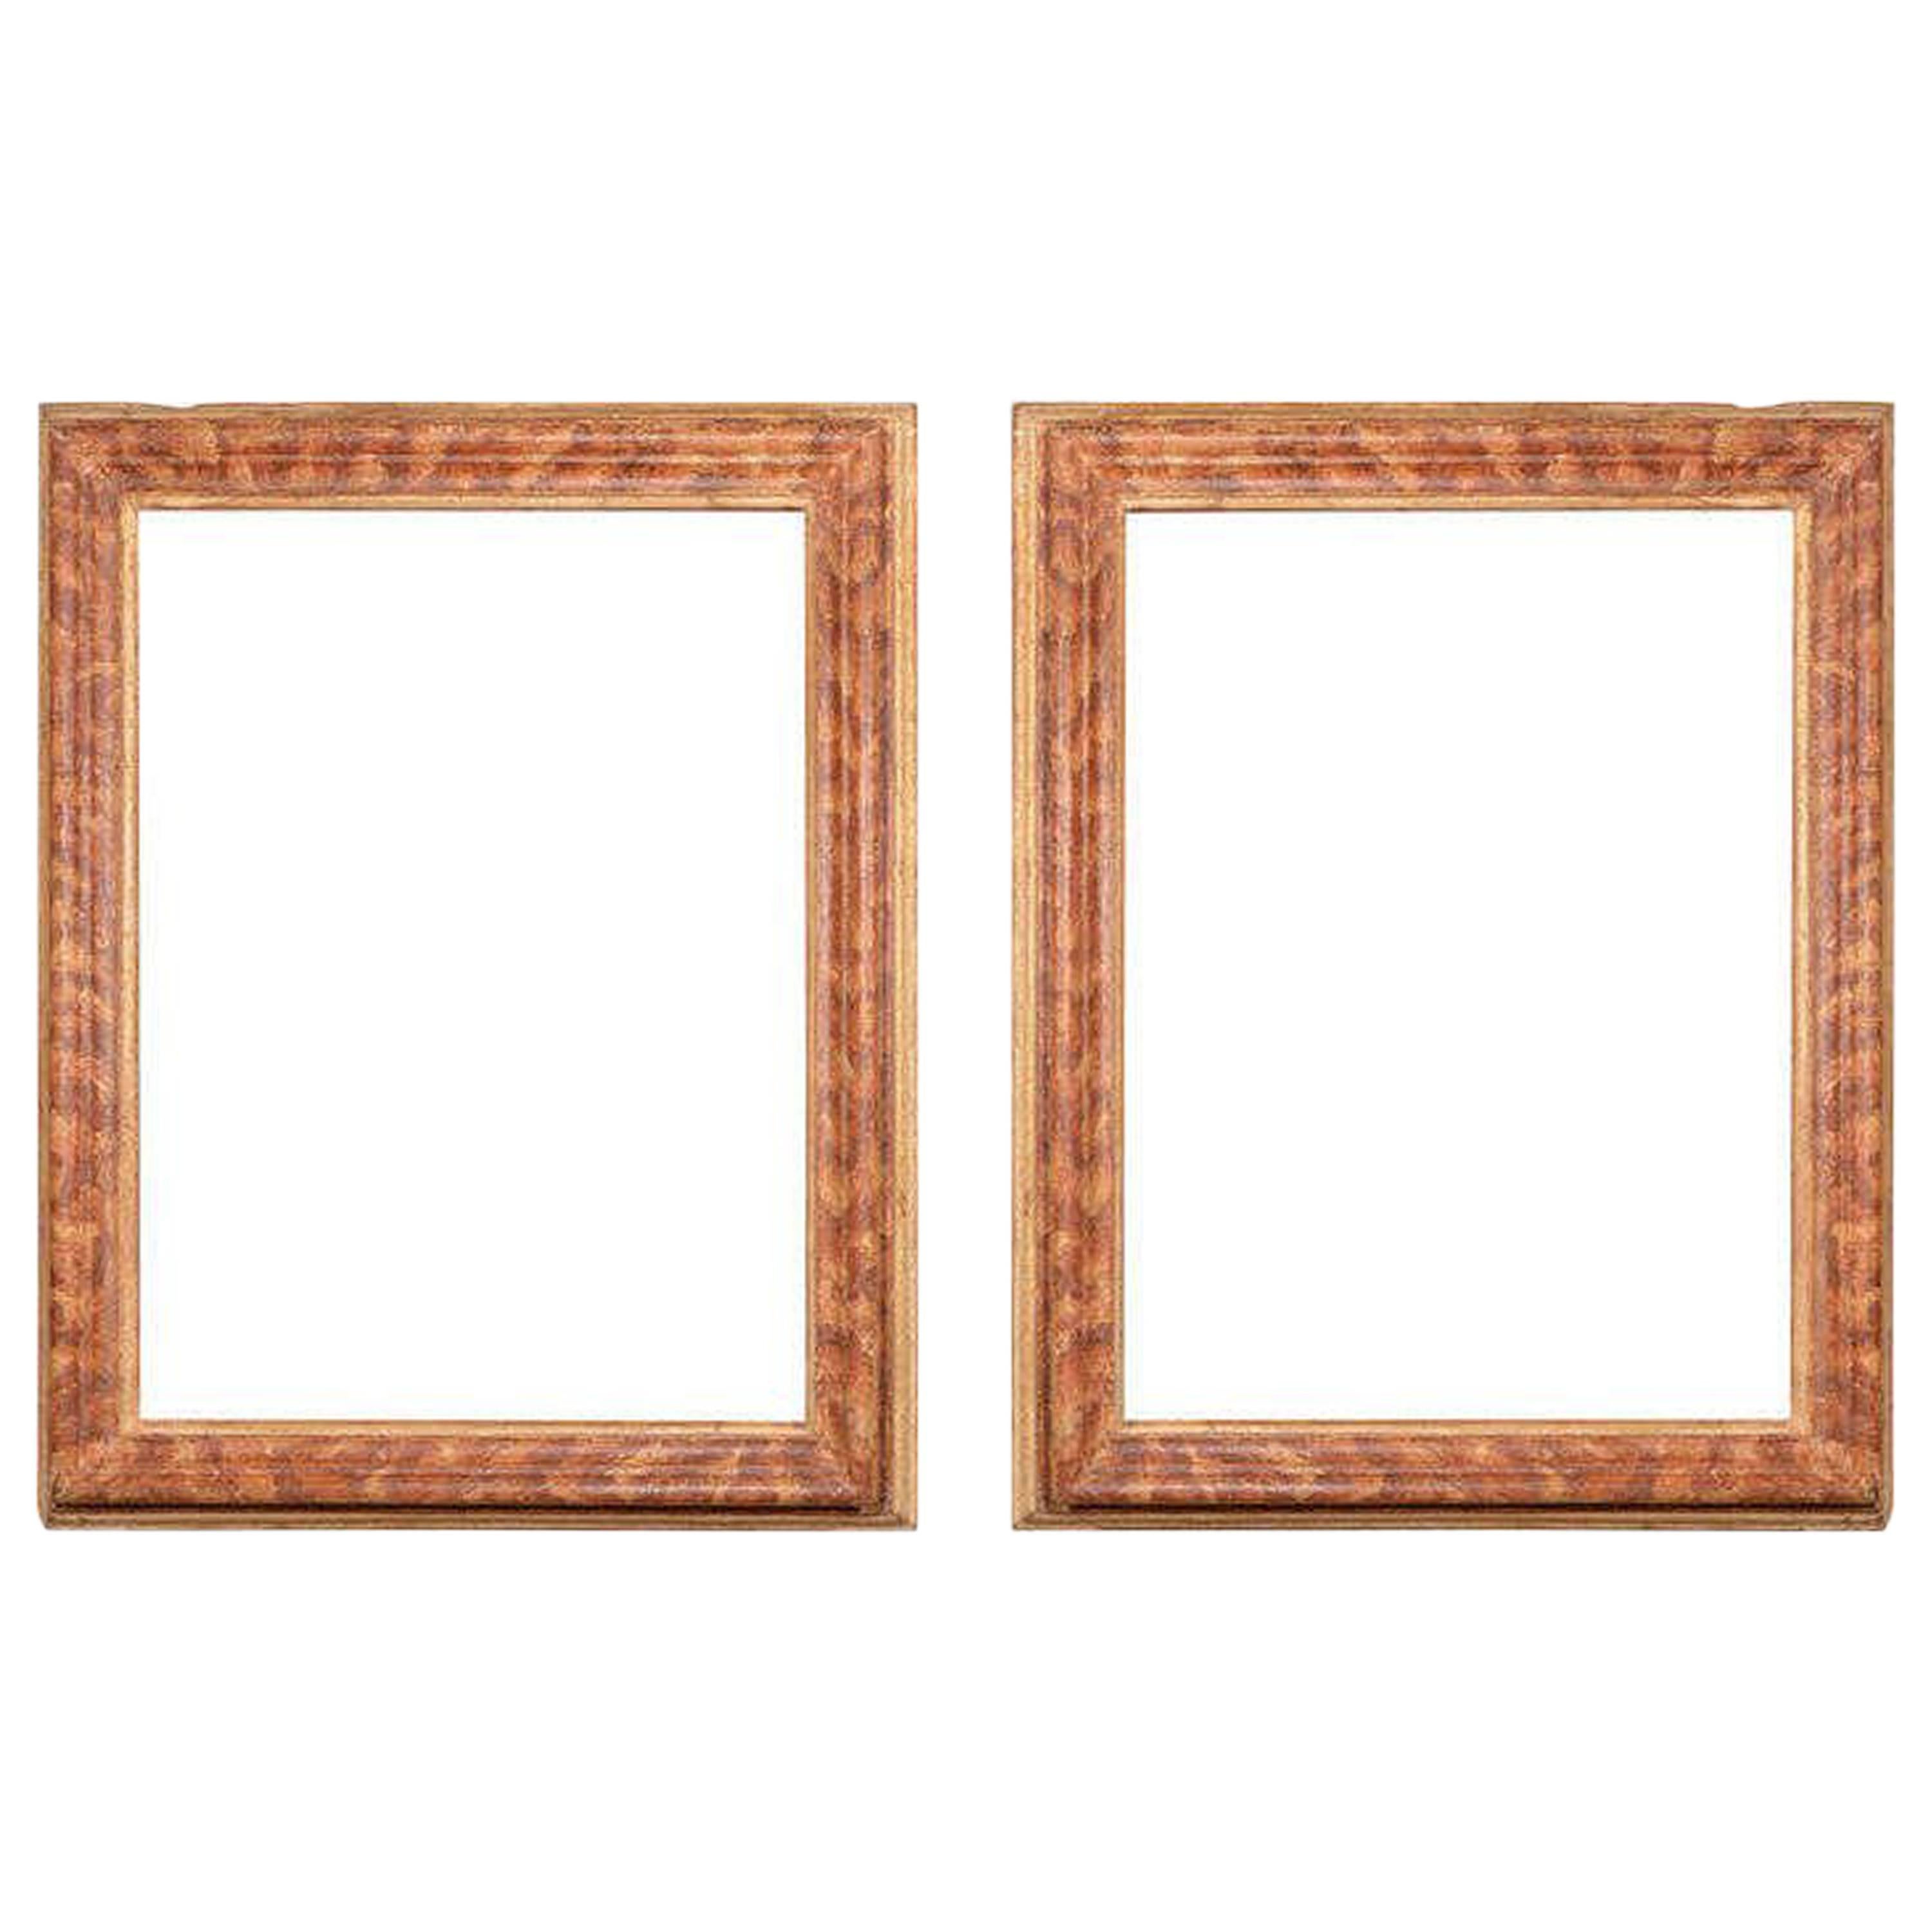 Pair of Faux Painted Frames